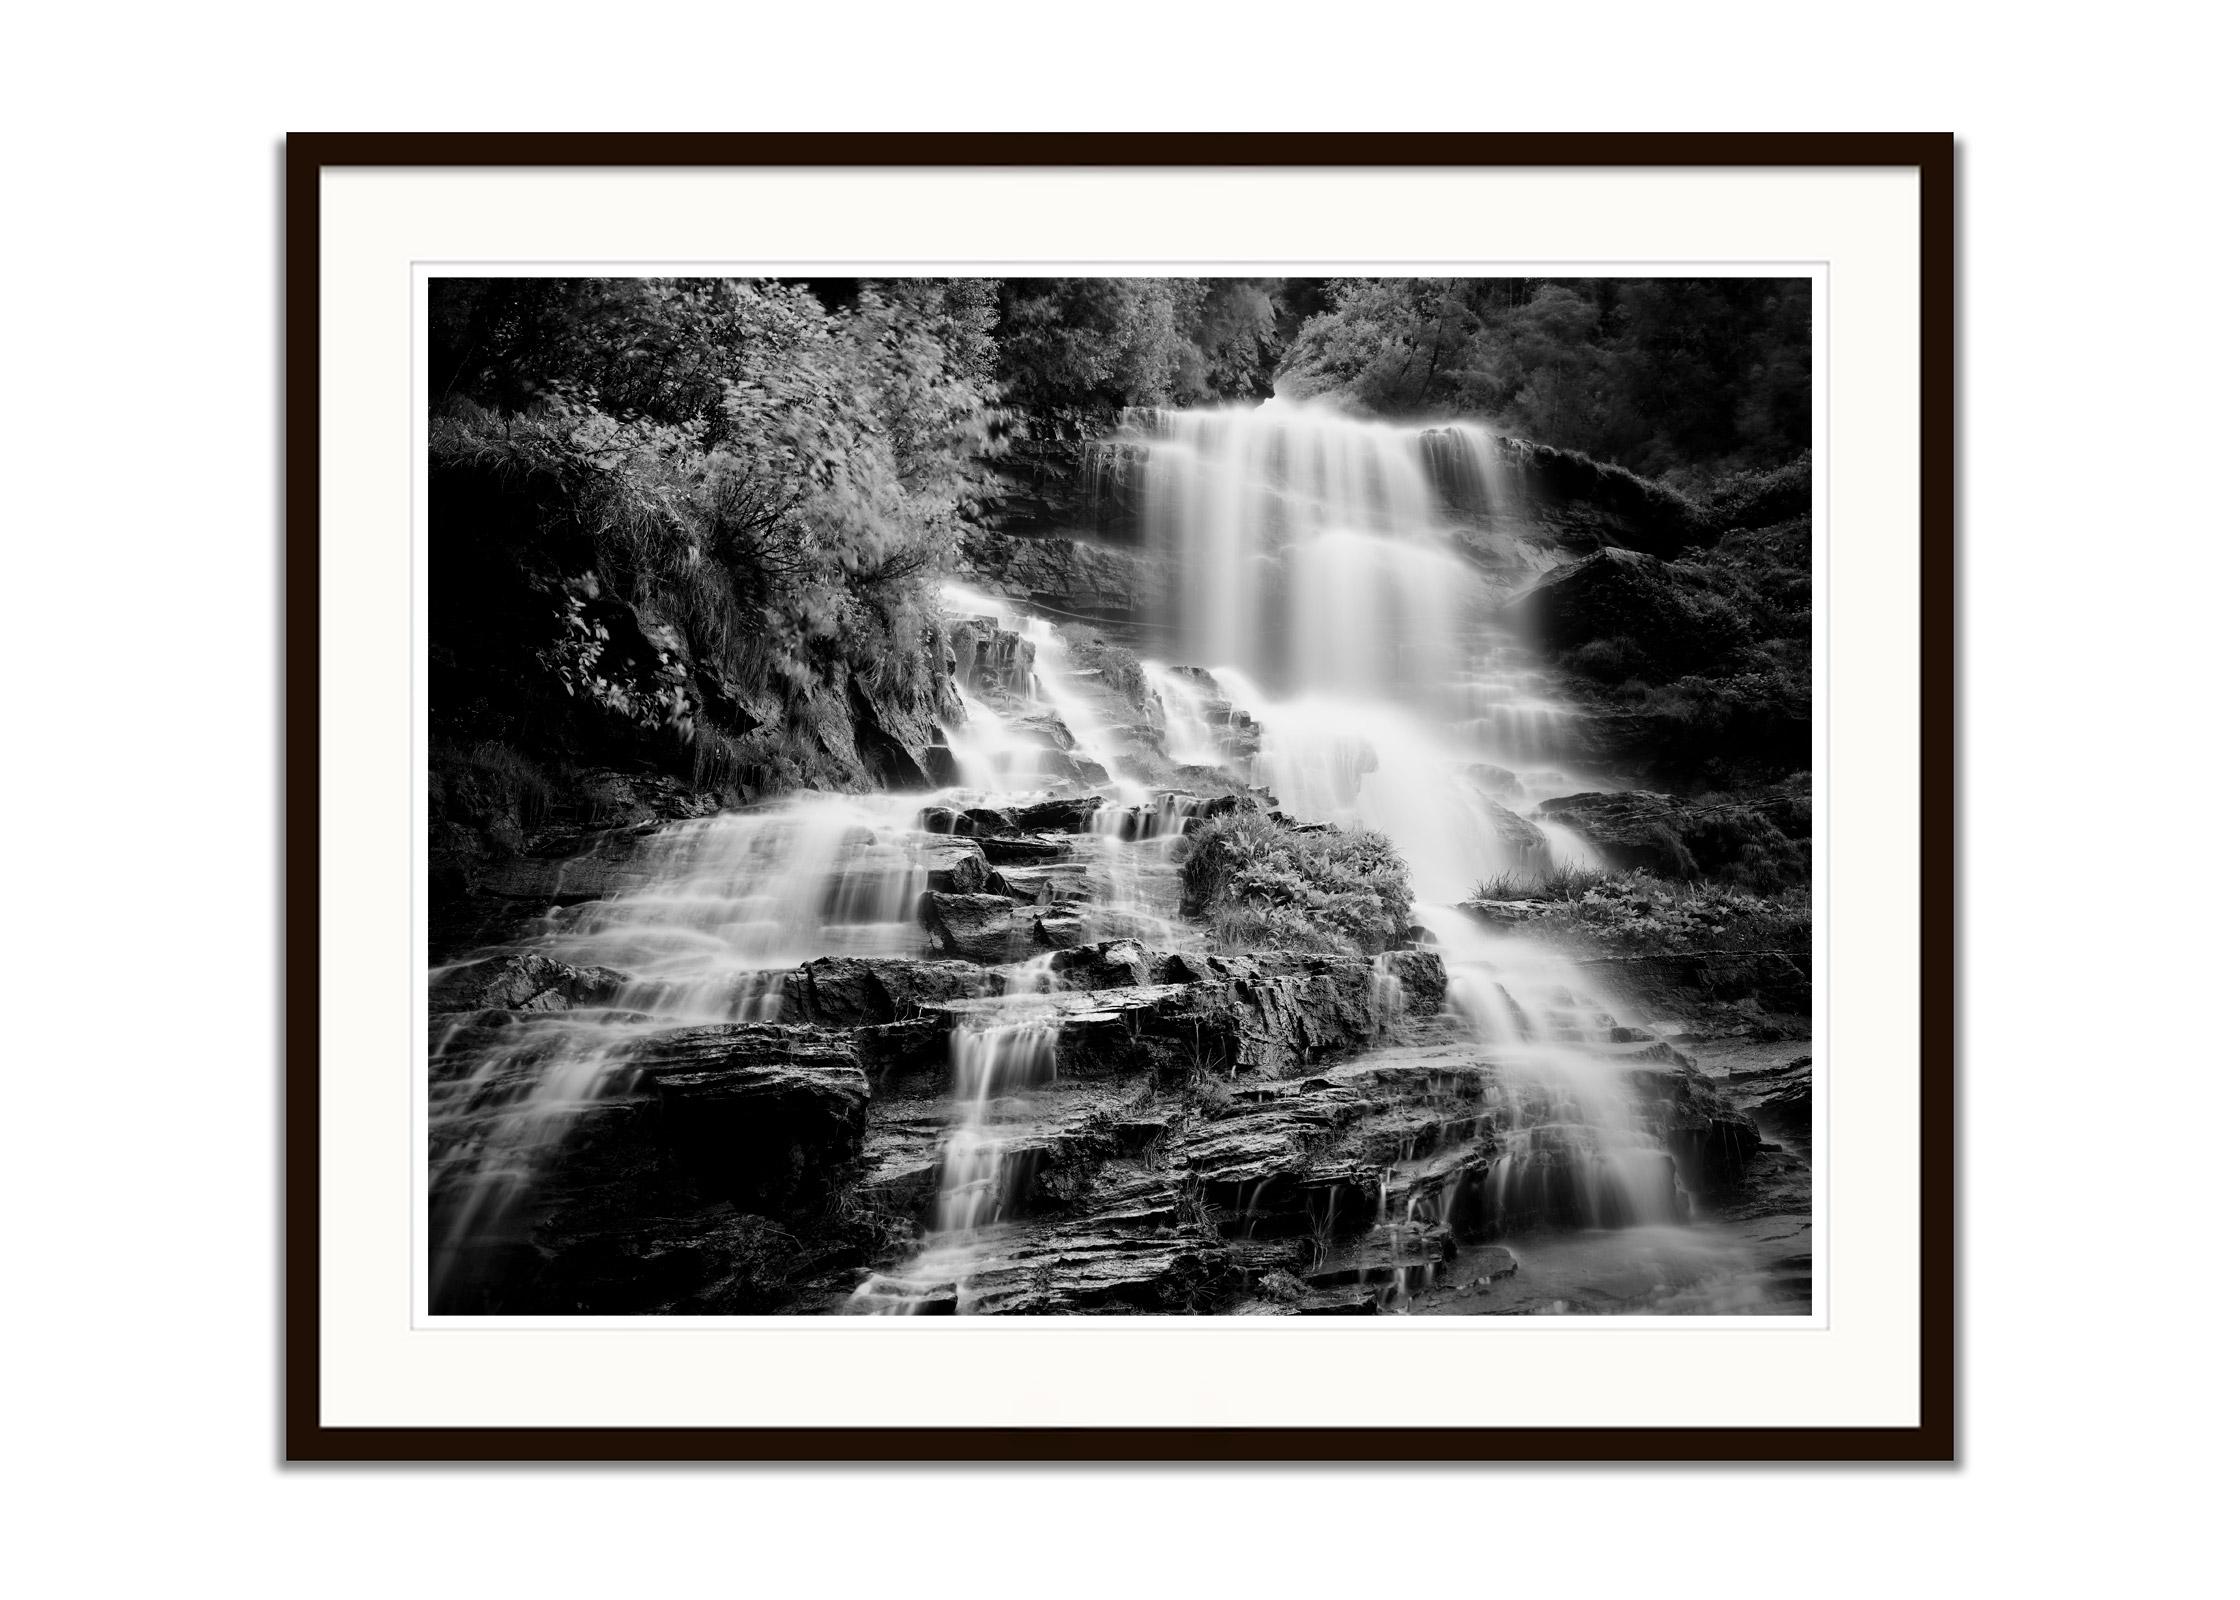 Klockelefall, Waterfall, Mountain stream, black and white photography, landscape - Black Landscape Photograph by Gerald Berghammer